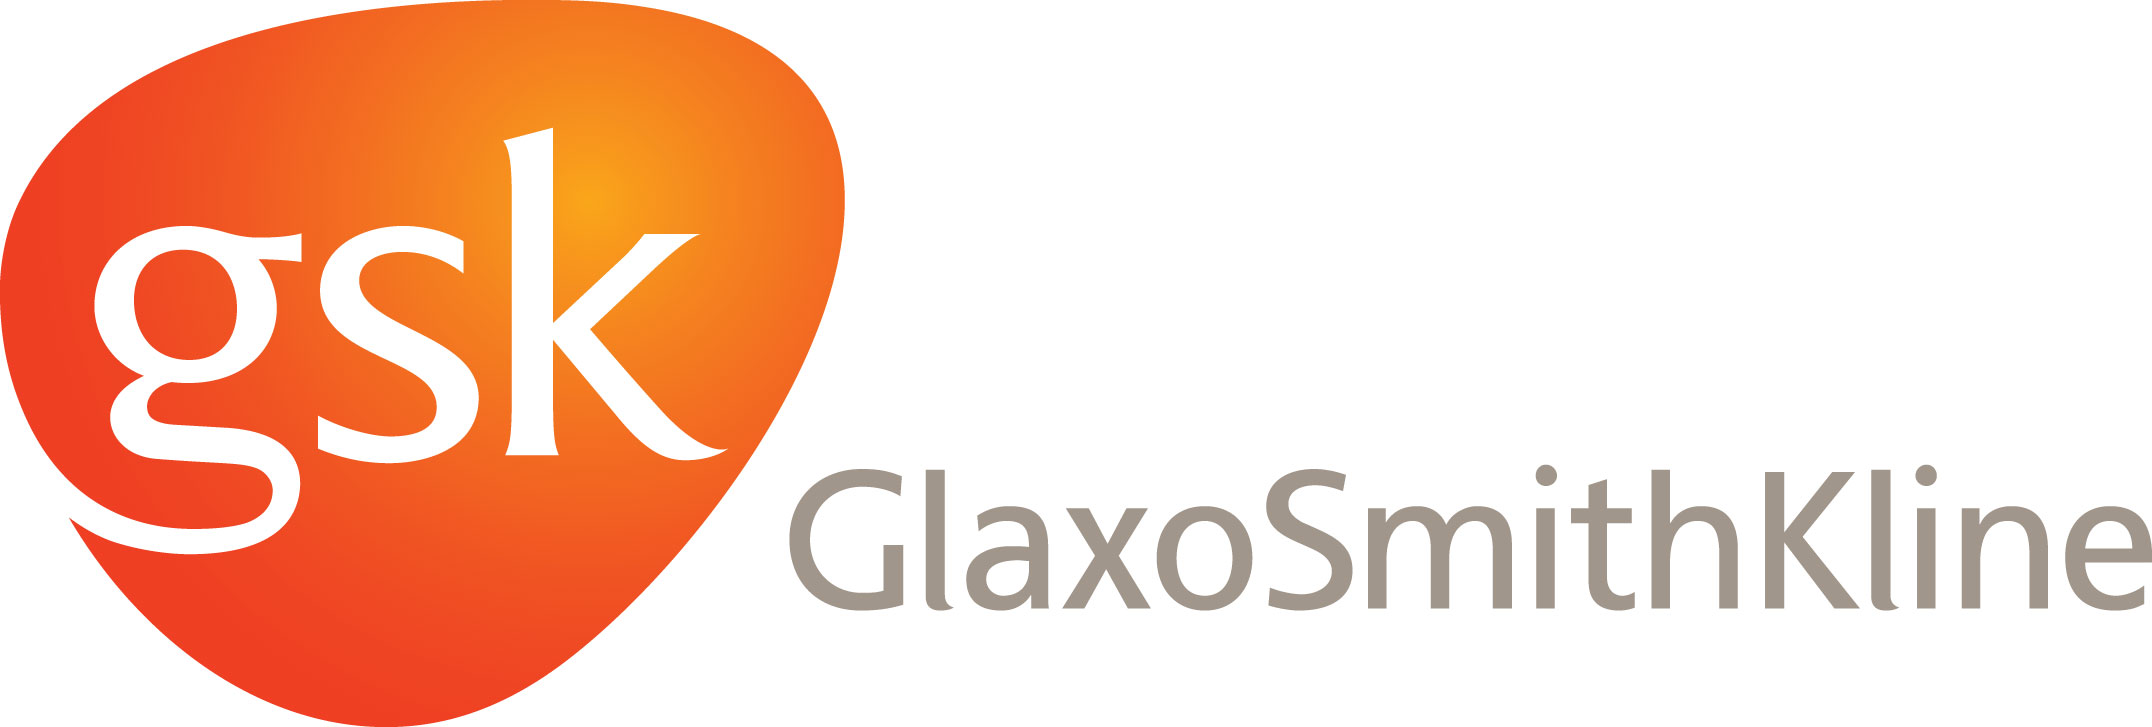 GSK launches first call for proposals for research in to non-communicable diseases in Sub-Saharan Africa